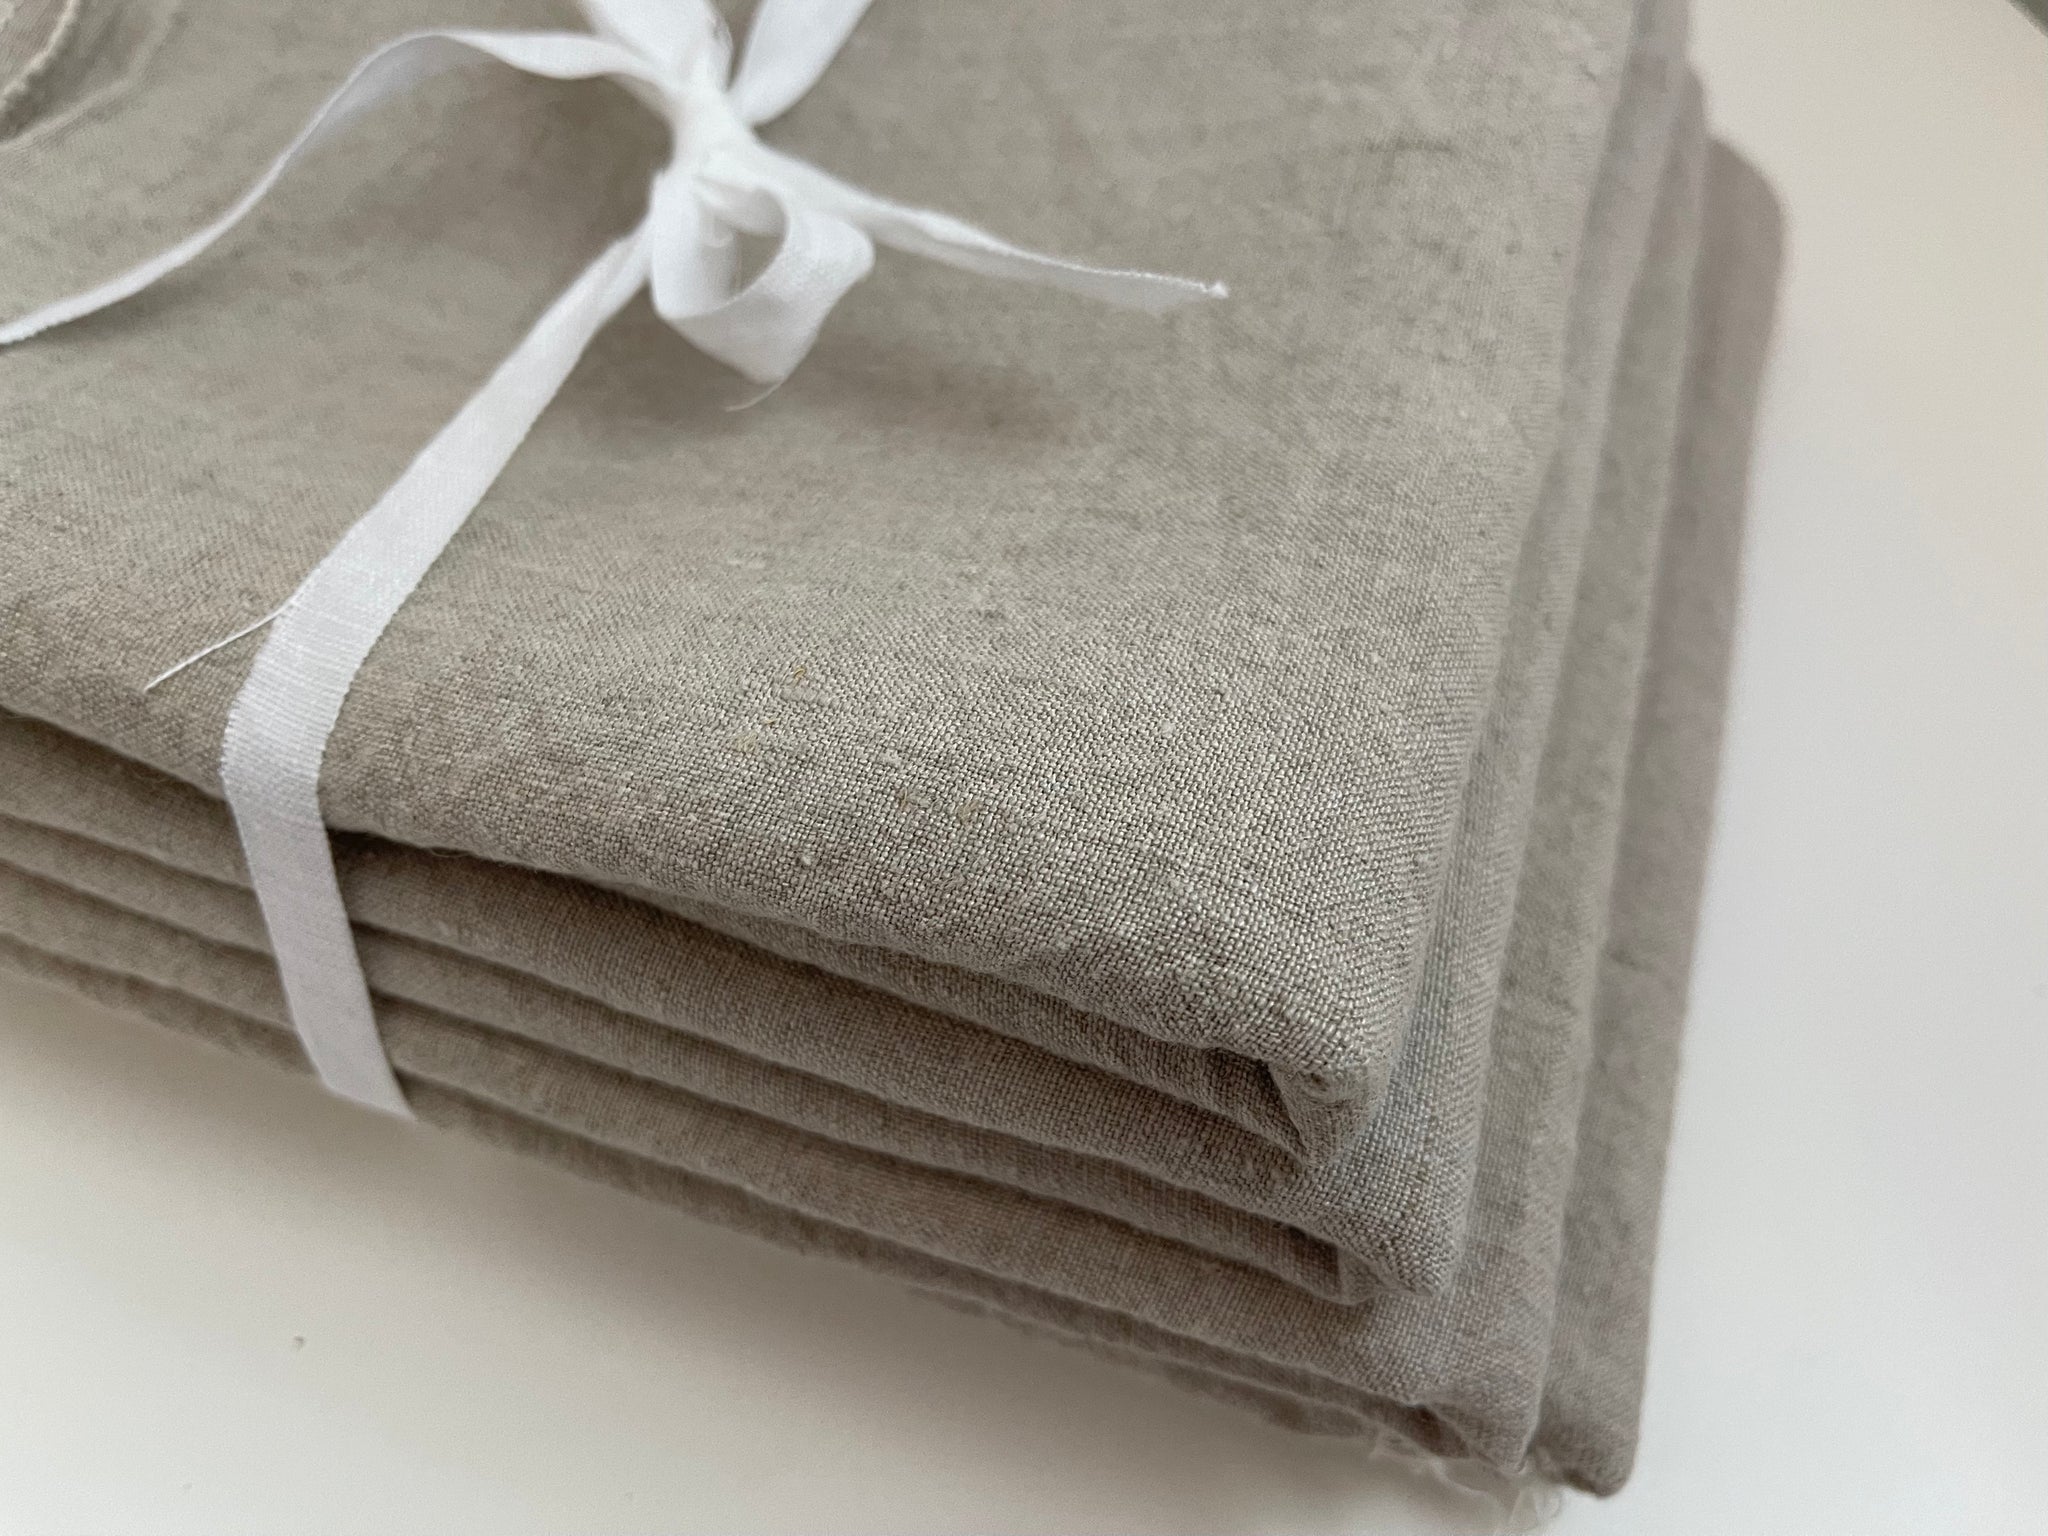 Linen Fabric Remnants - Natural Stone Washed - approx. 2 yards